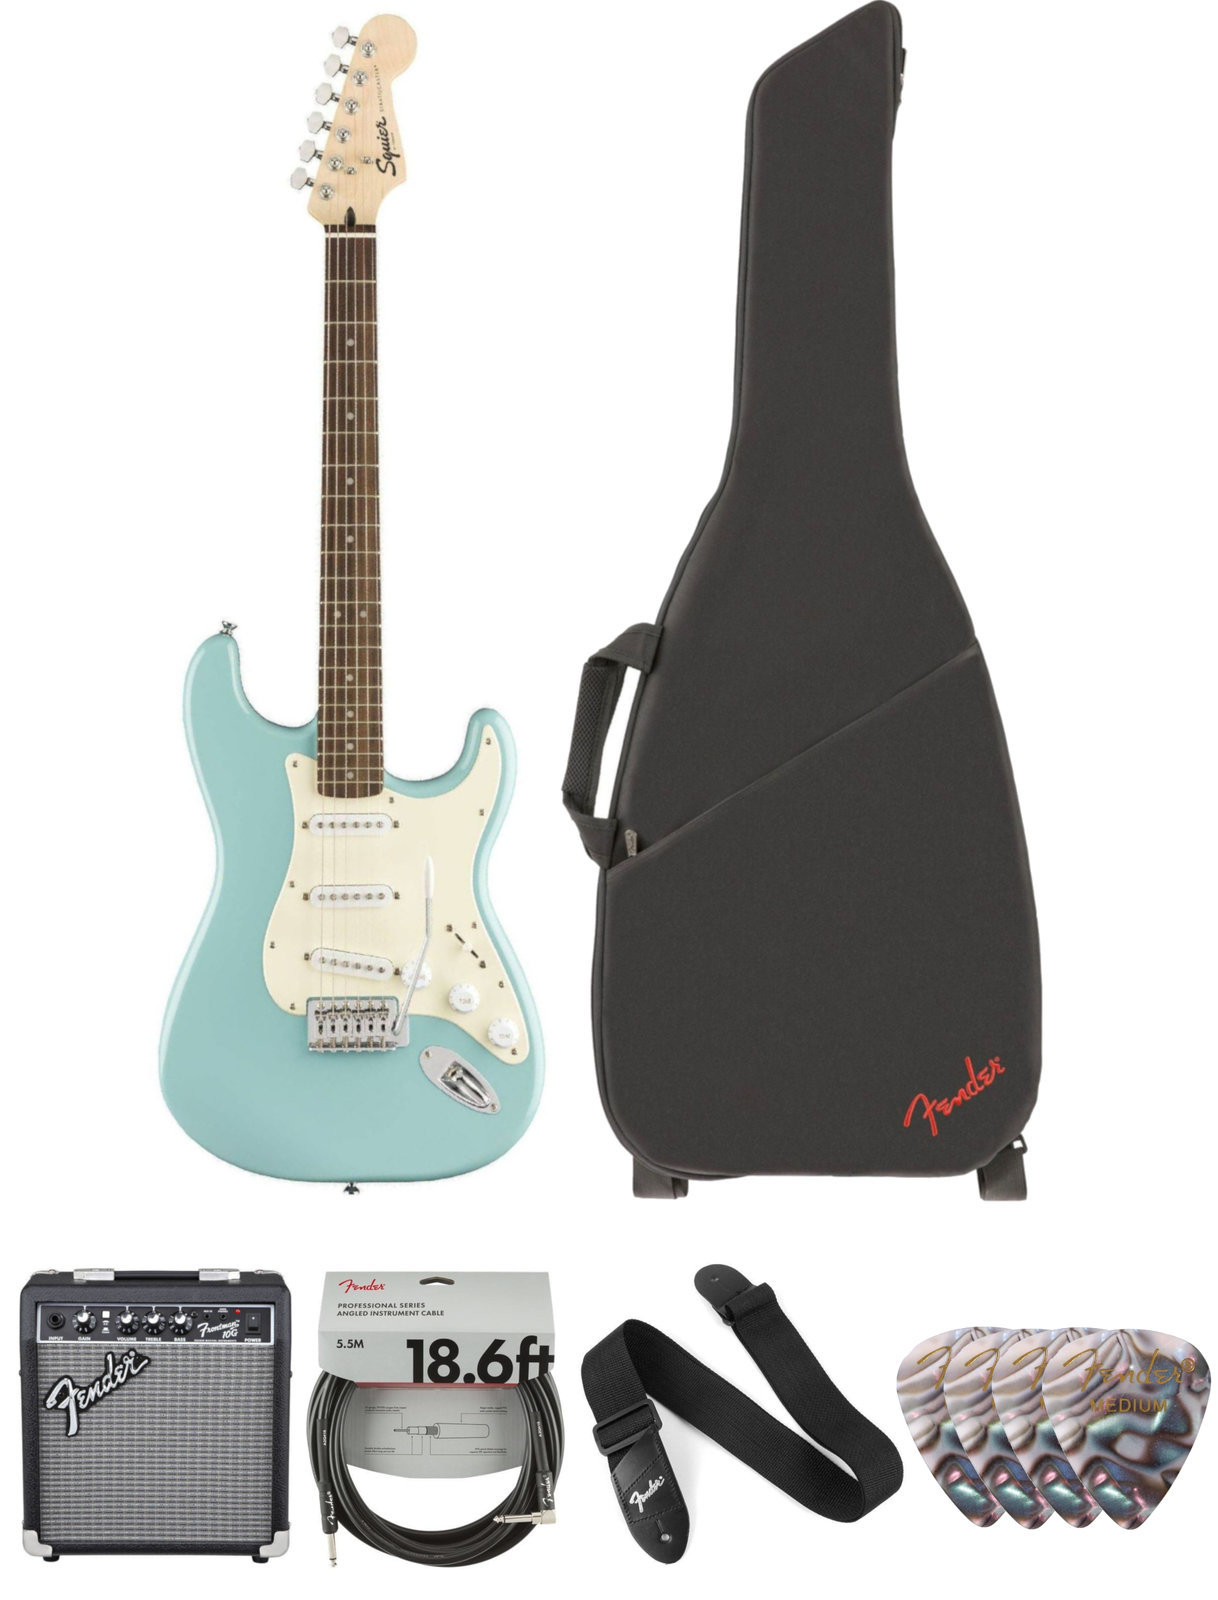 Elektrisk guitar Fender Squier Bullet Stratocaster Tremolo IL Tropical Turquoise Deluxe SET Tropical Turquoise